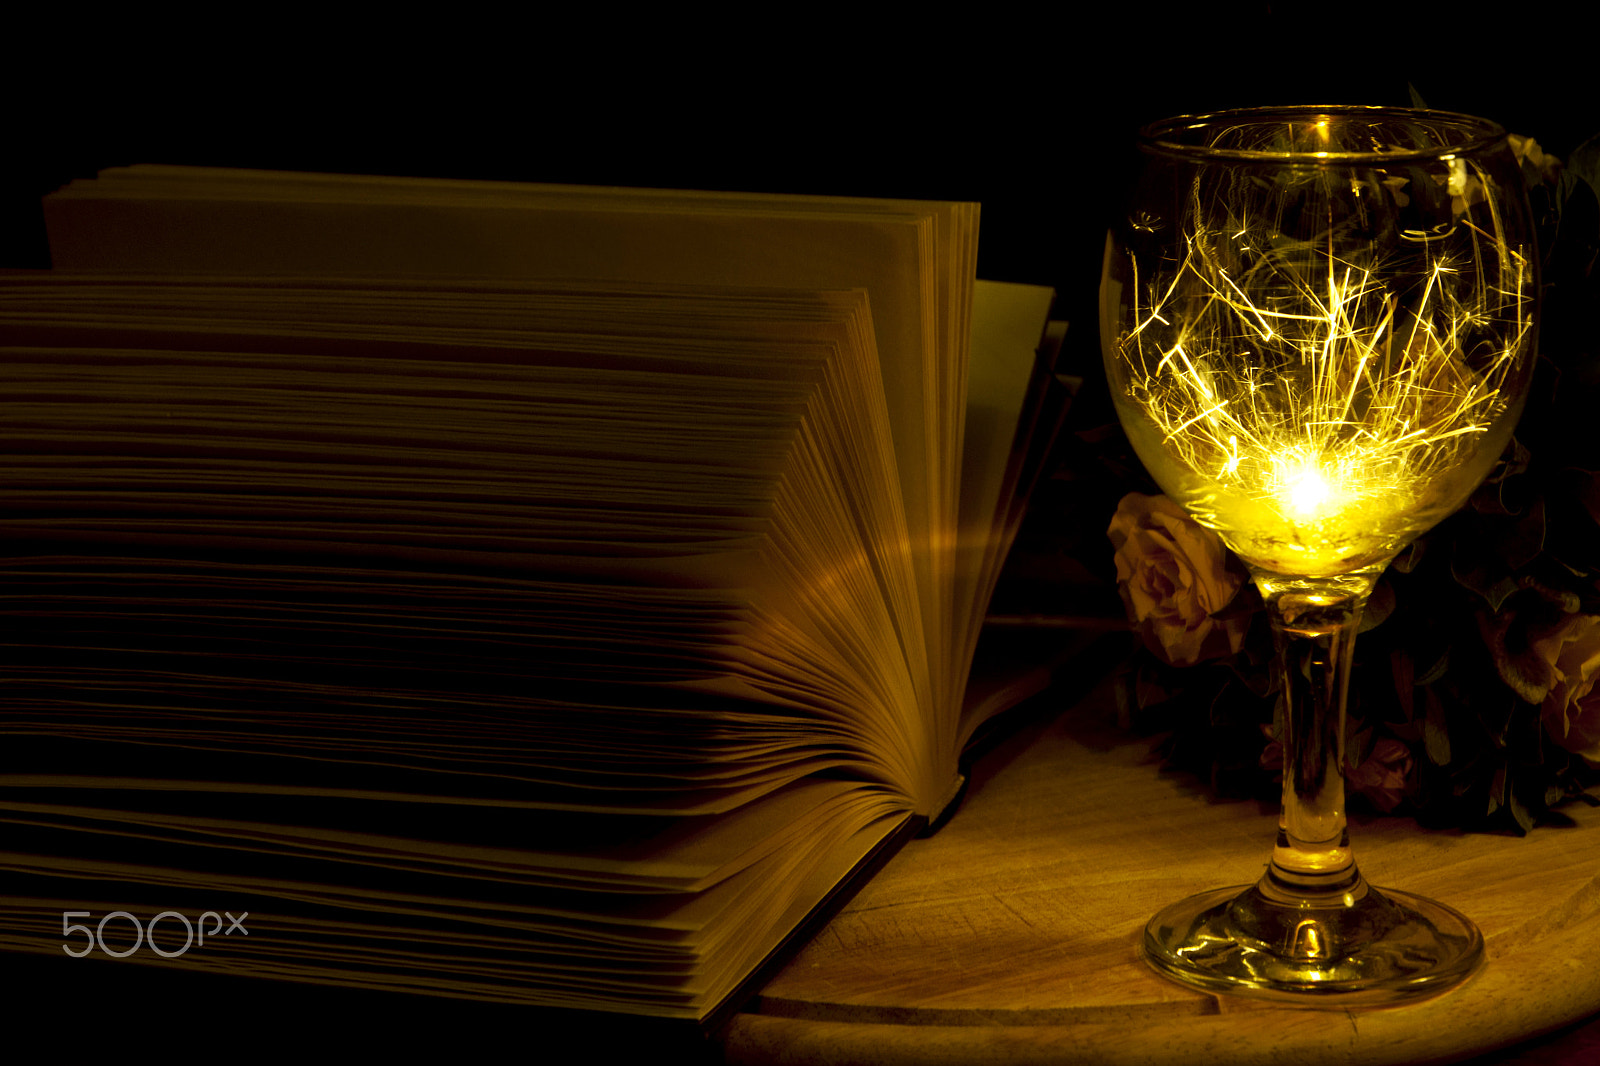 Sony Alpha DSLR-A700 sample photo. Magic literature and sparks in the glass photography